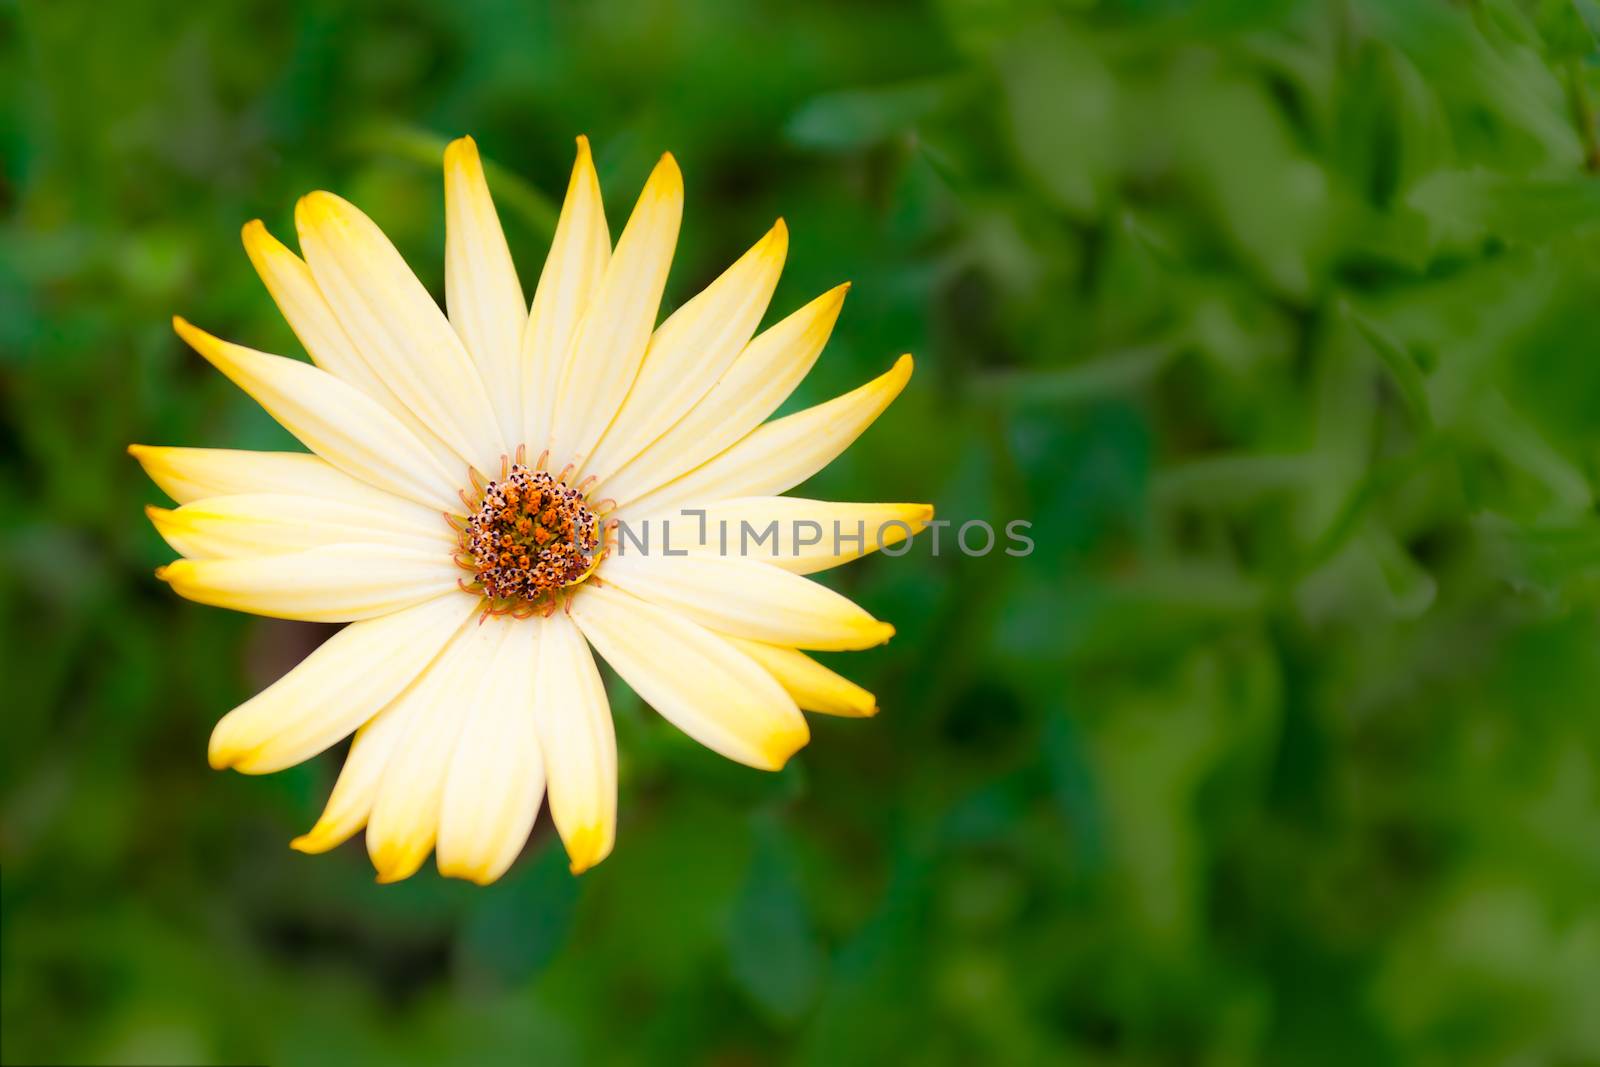 Flower on a green blurred background